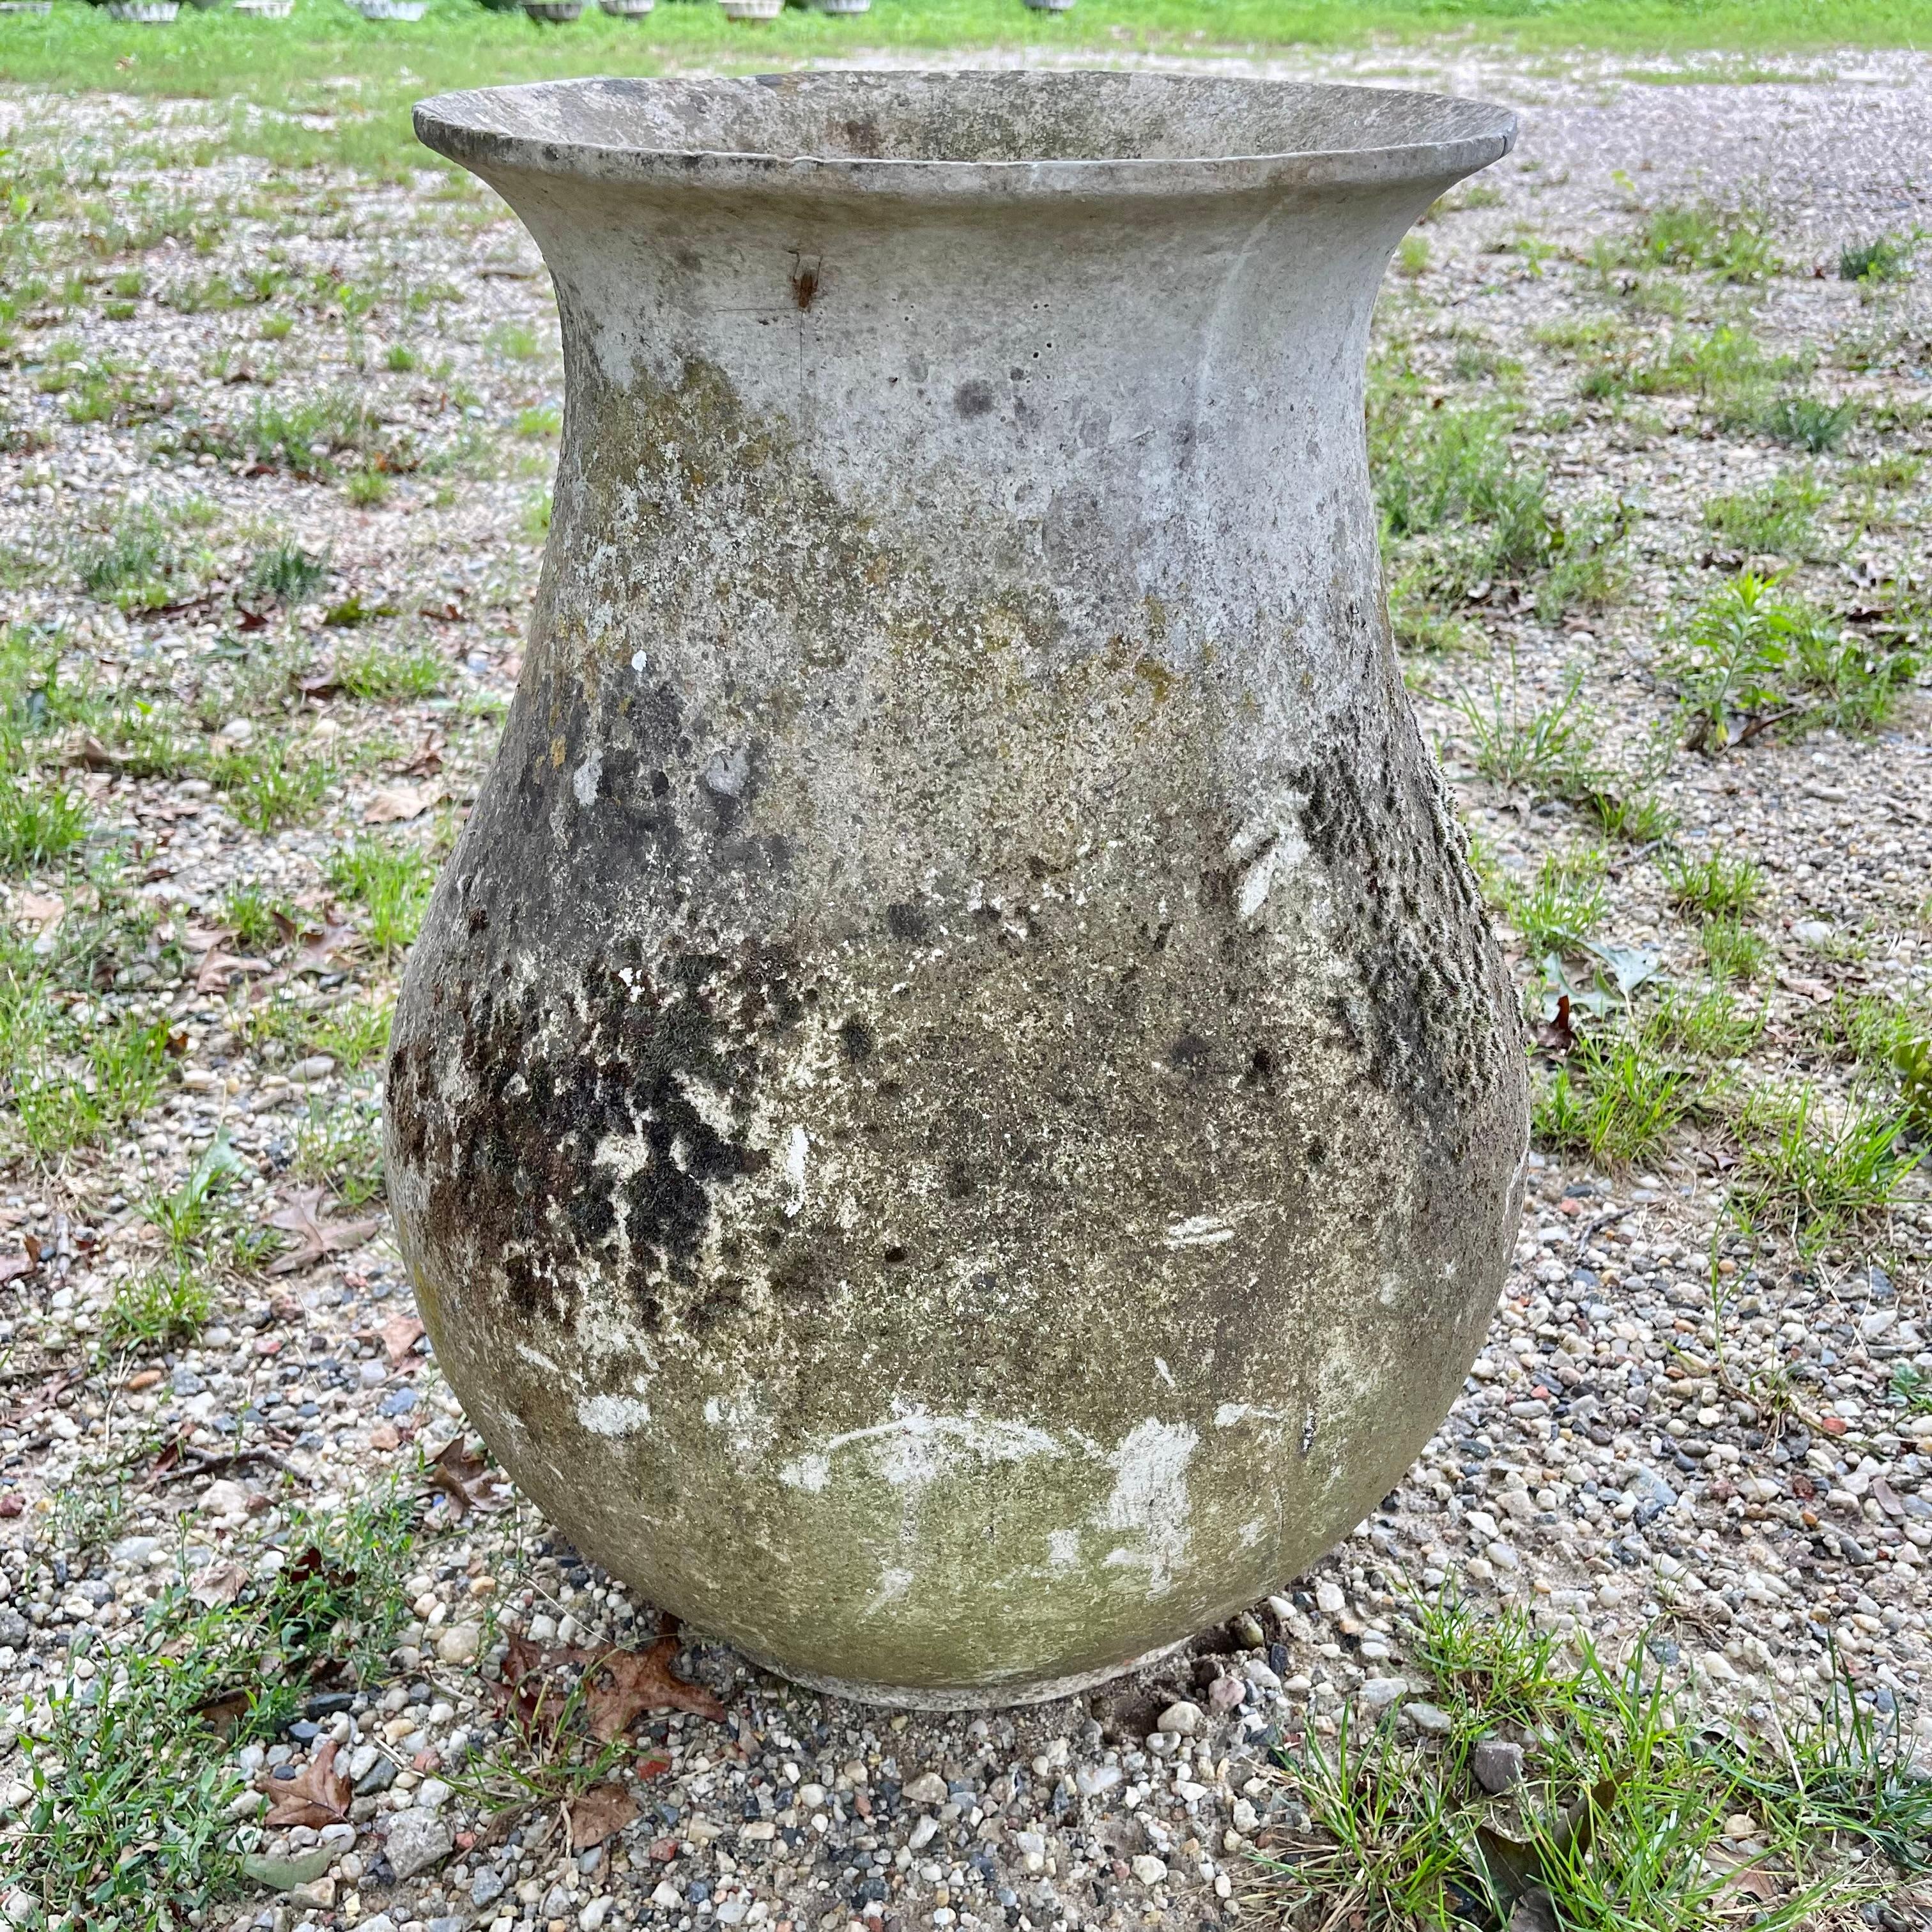 Spectacular concrete vase by Willy Guhl. Extremely rare model. Slightly tapered neck with pronounced lip spout. Made of fiber cement. Decades of patina, moss and paint. Colors vary from grey to green and yellow. Beautiful texture and color with